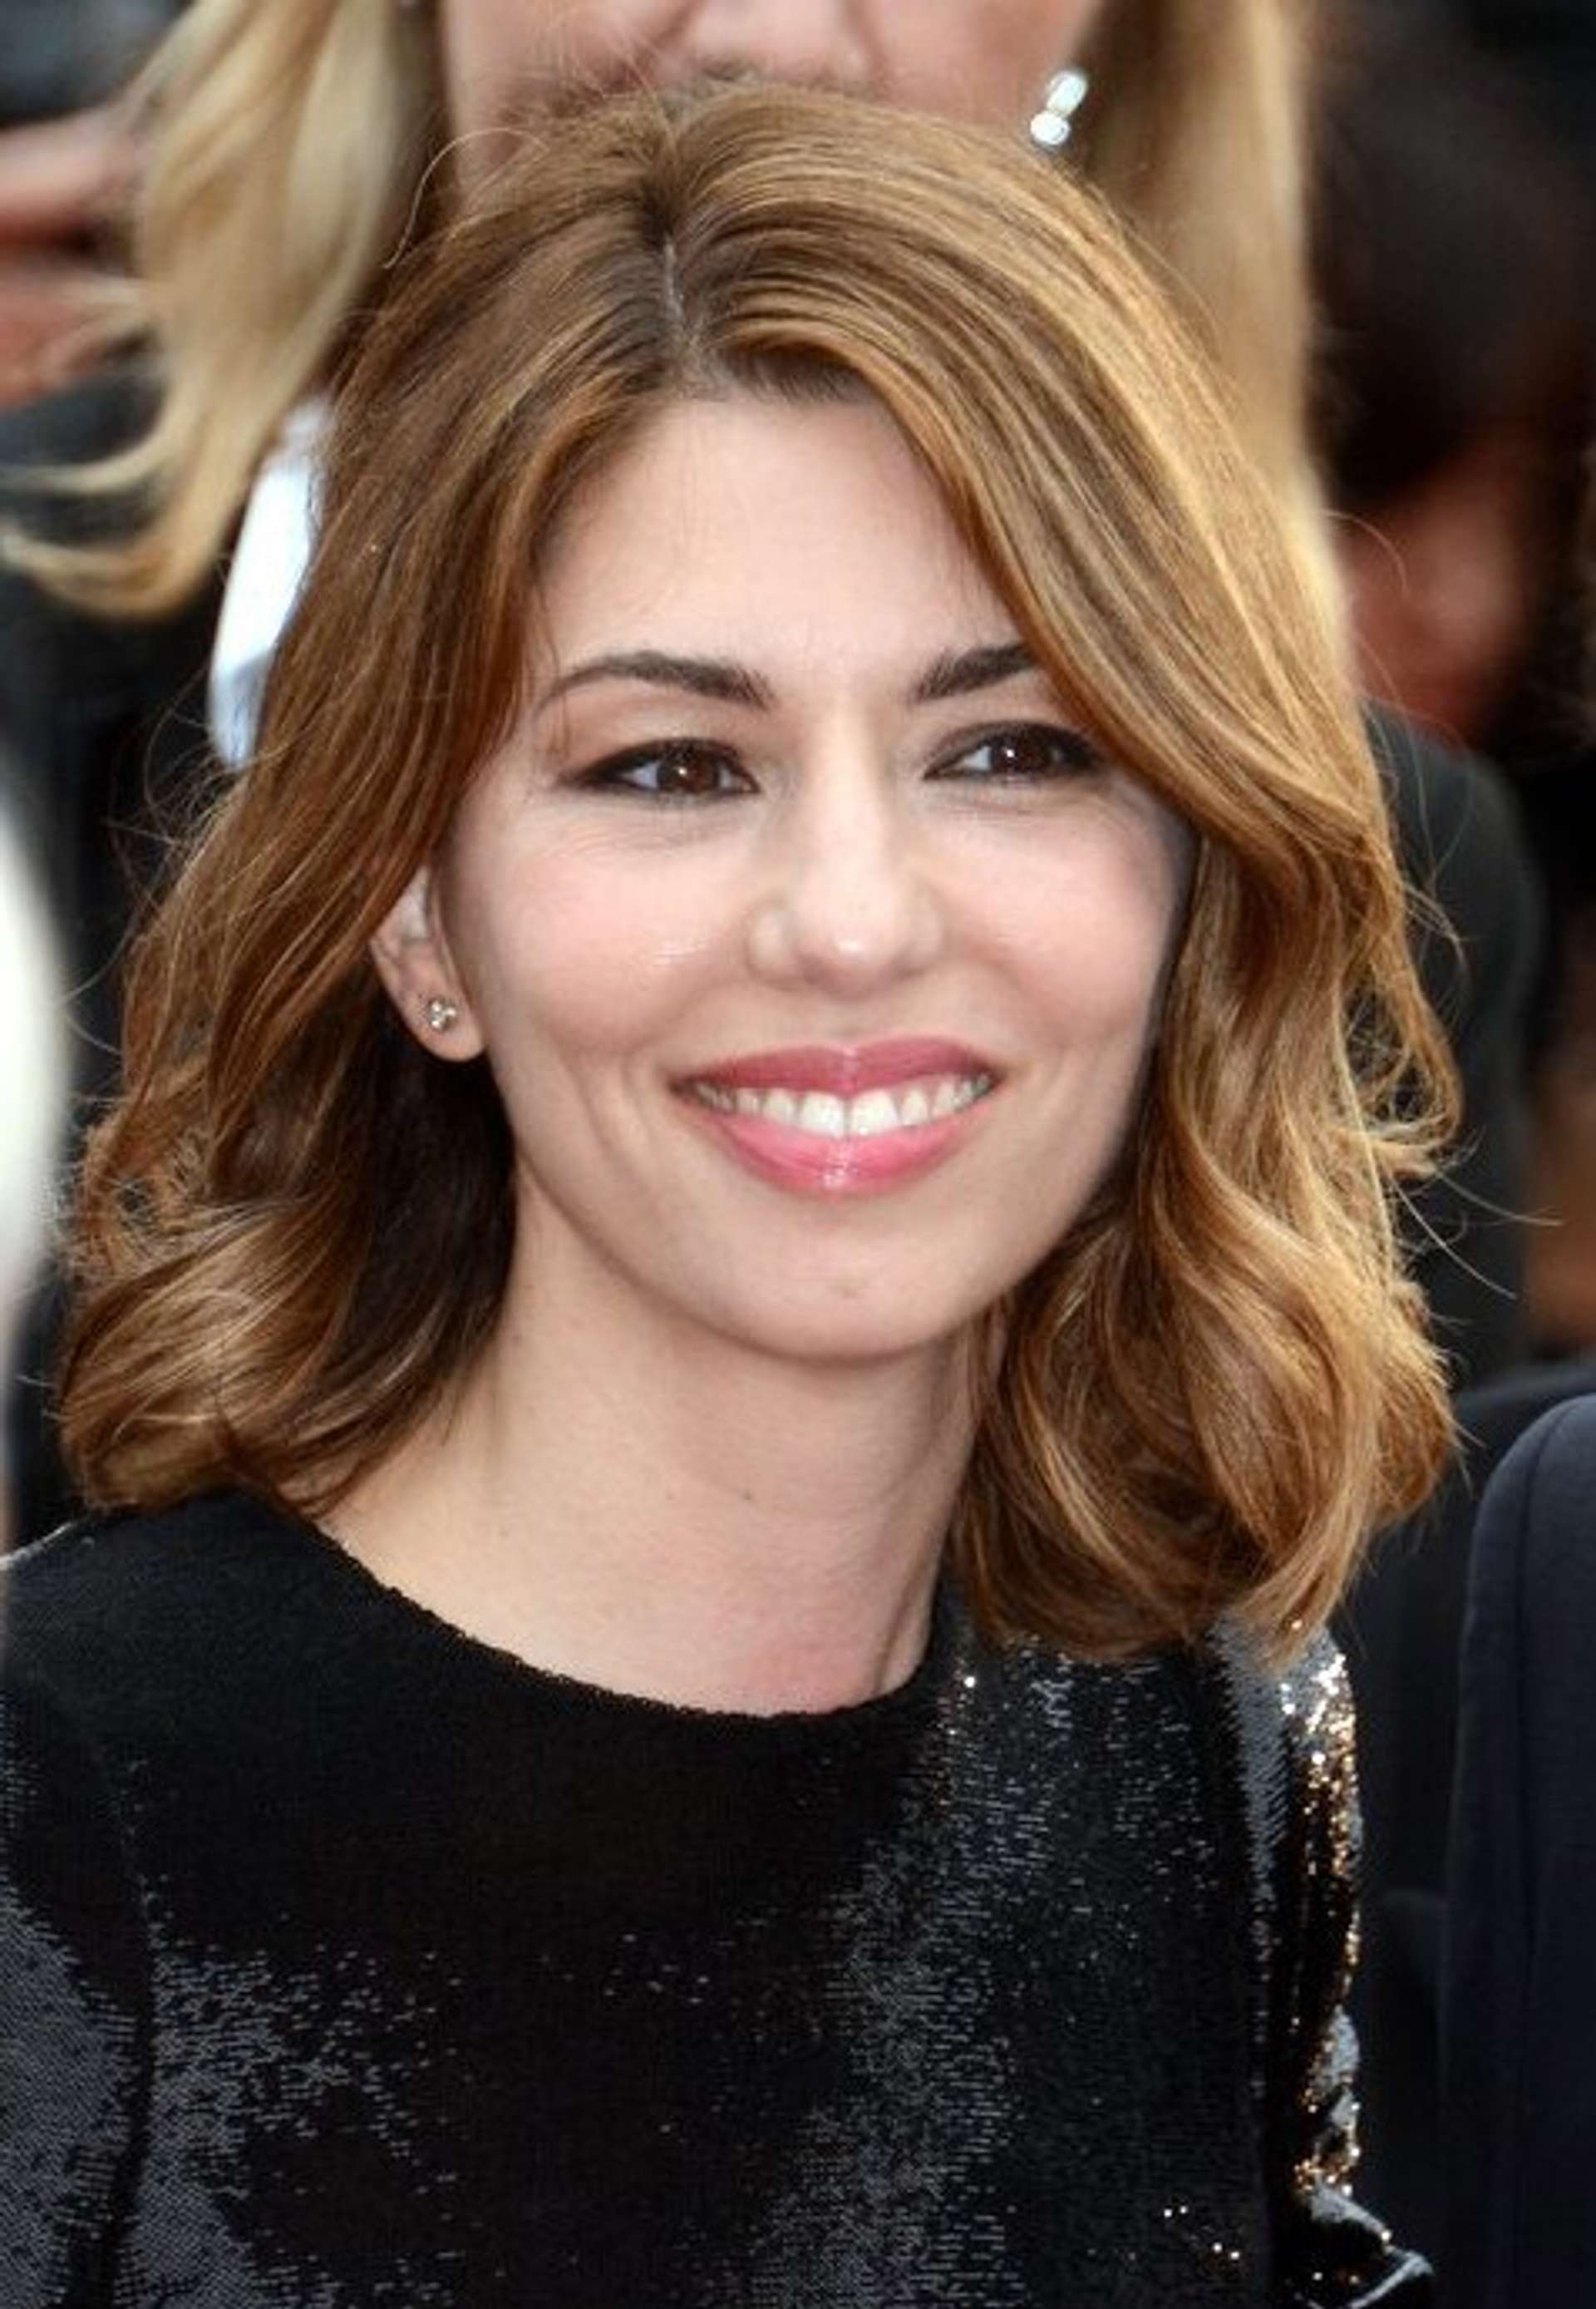 Portrait photograph of American filmmaker and actress Sofia Coppola, at the Cannes Film Festival, 2013.